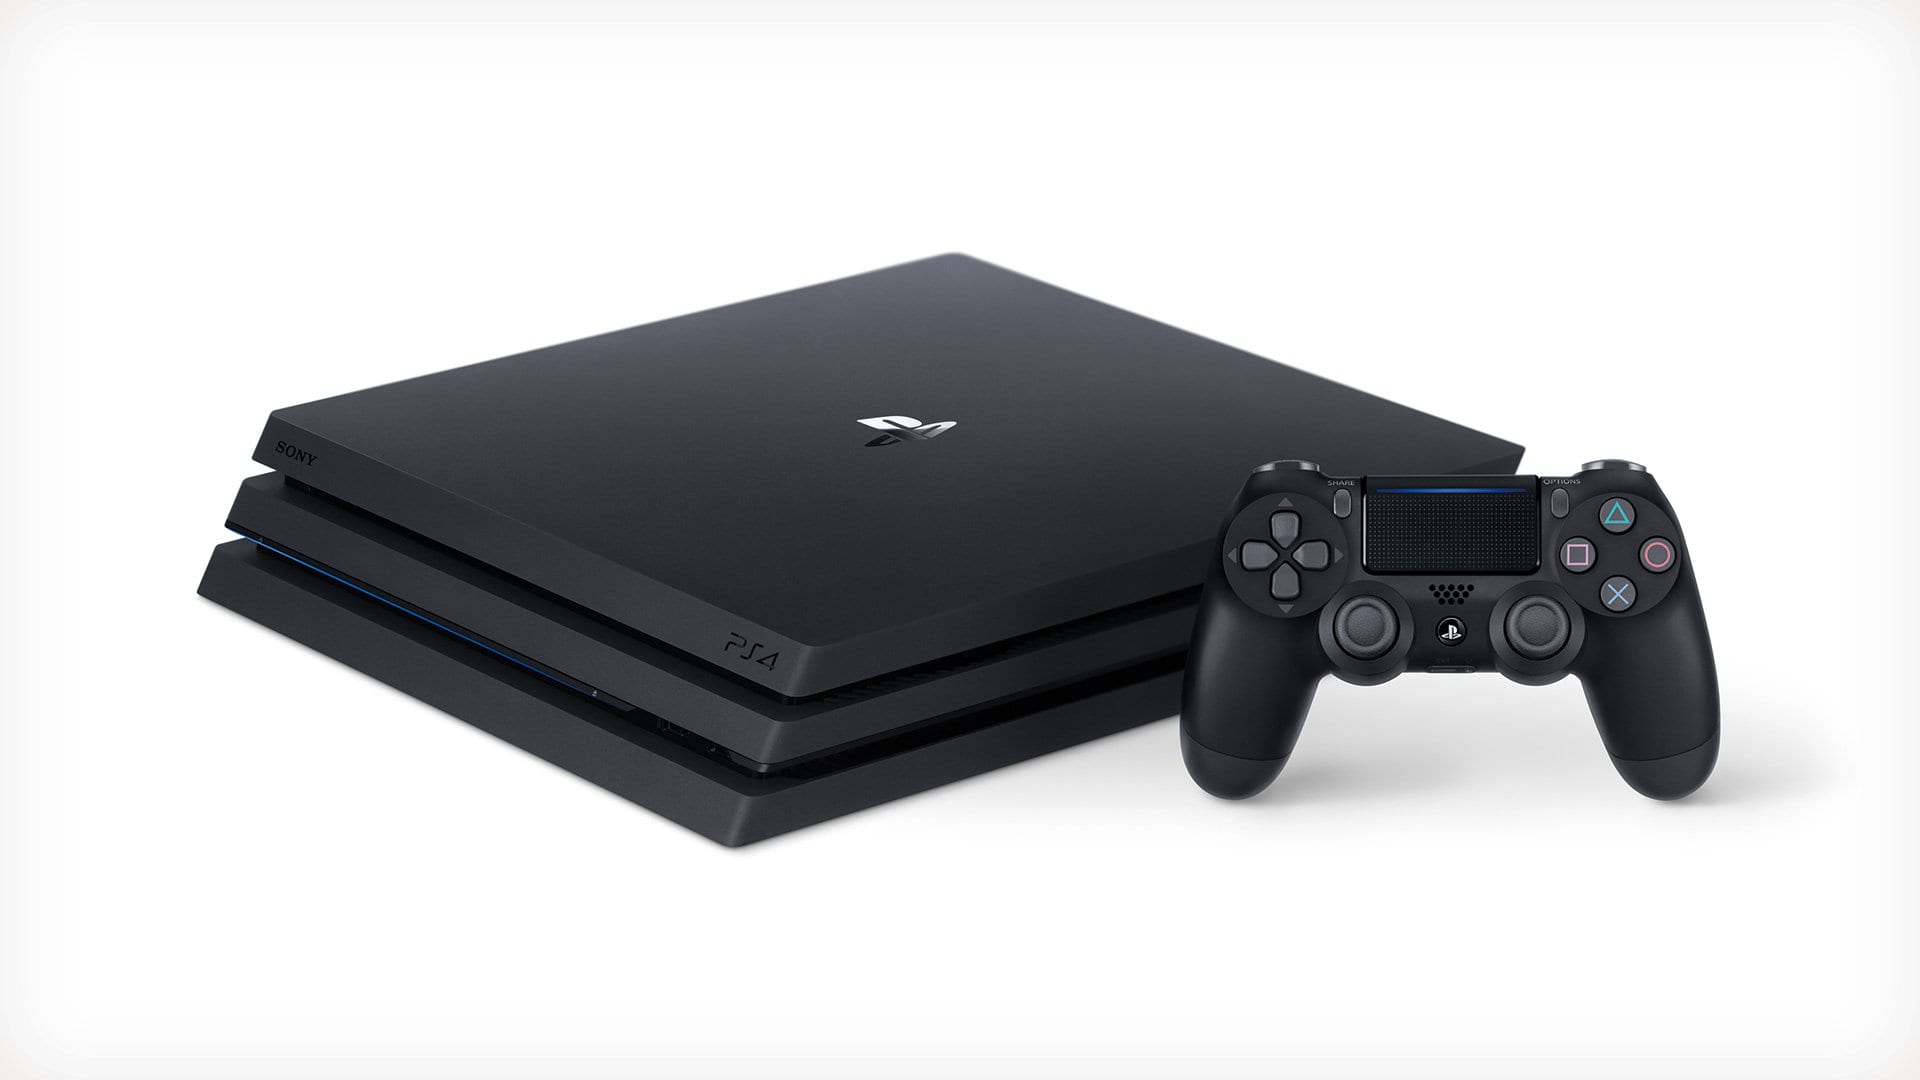 Guide: Setting Up Your New PS4 This Christmas